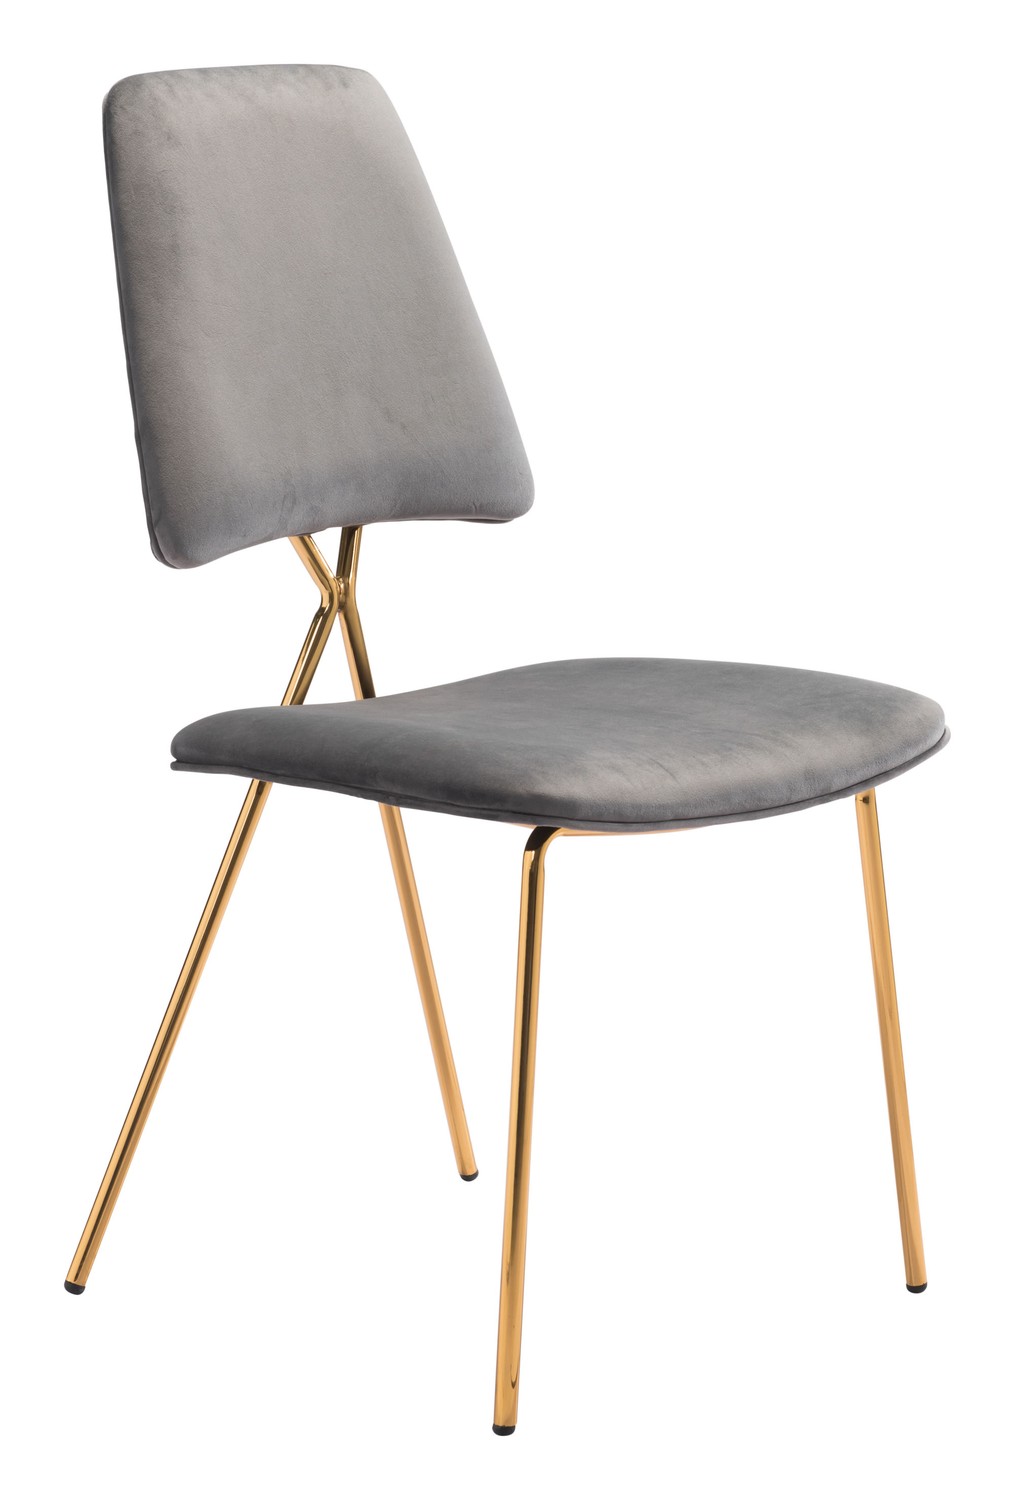 19.7" x 21.9" x 35.8" Gray and Gold Velvet Steel and Plywood Chair Set of 2